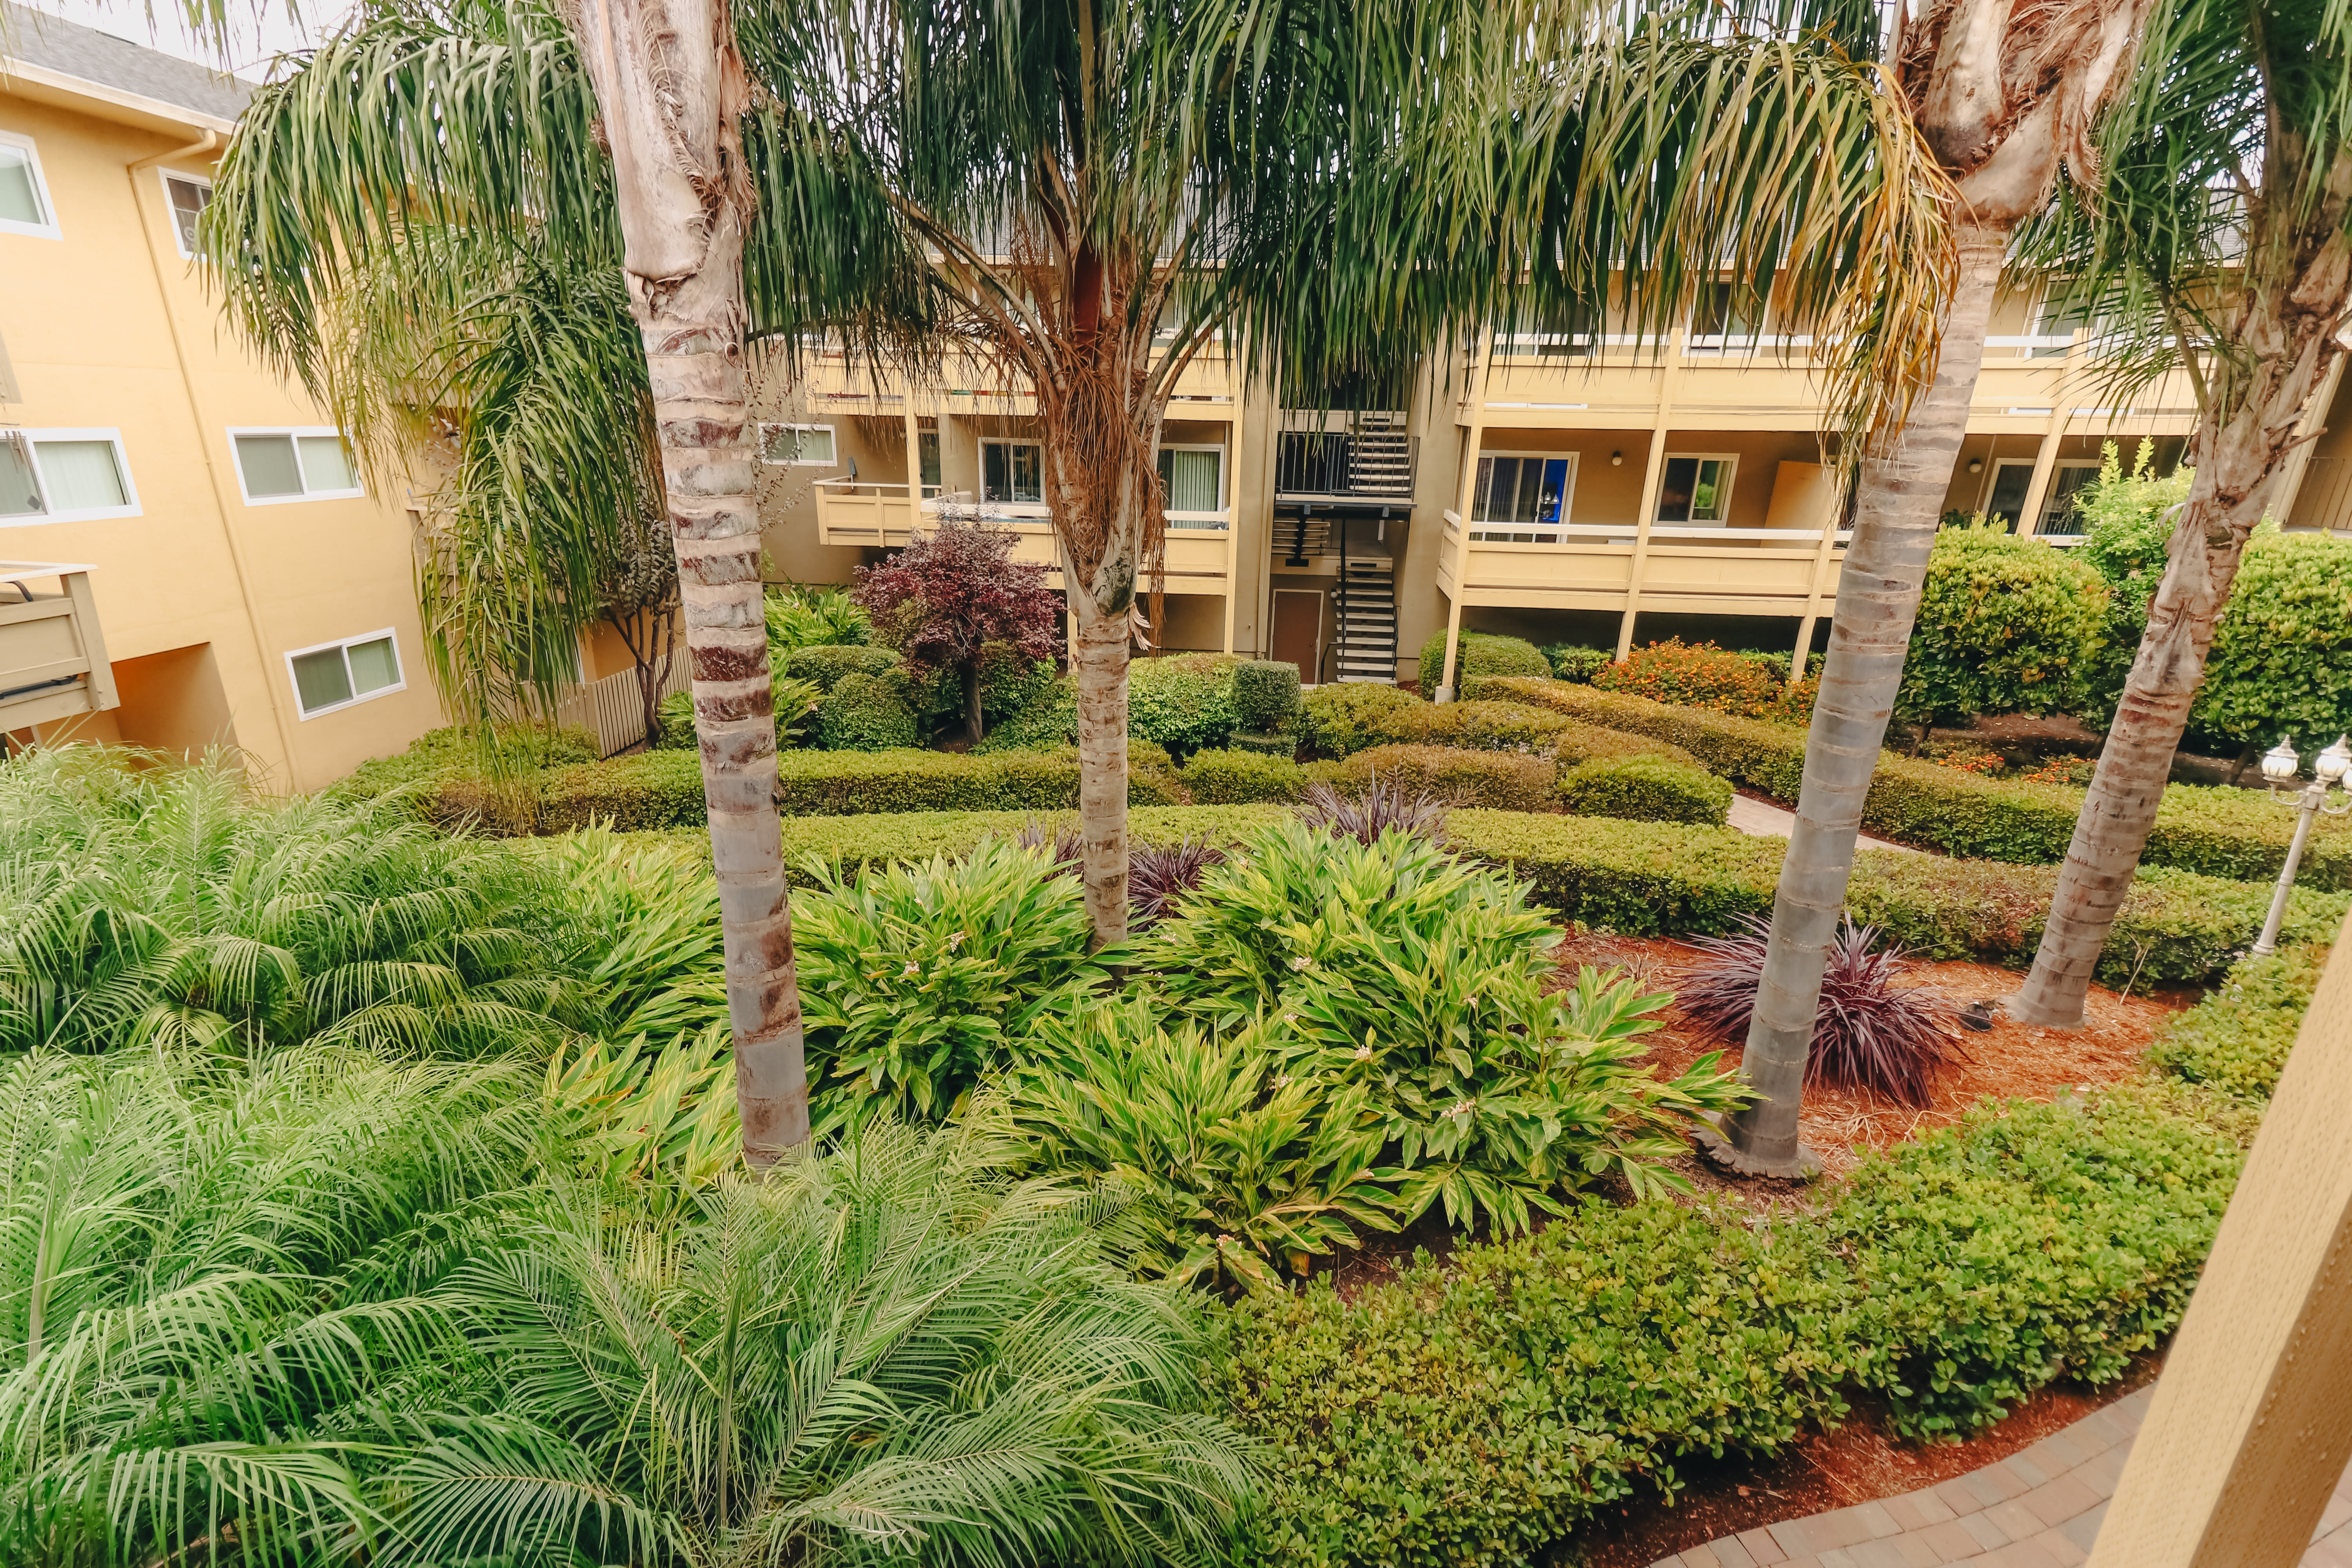 Login for users of our website at Bayfair Apartment Homes in San Lorenzo, California